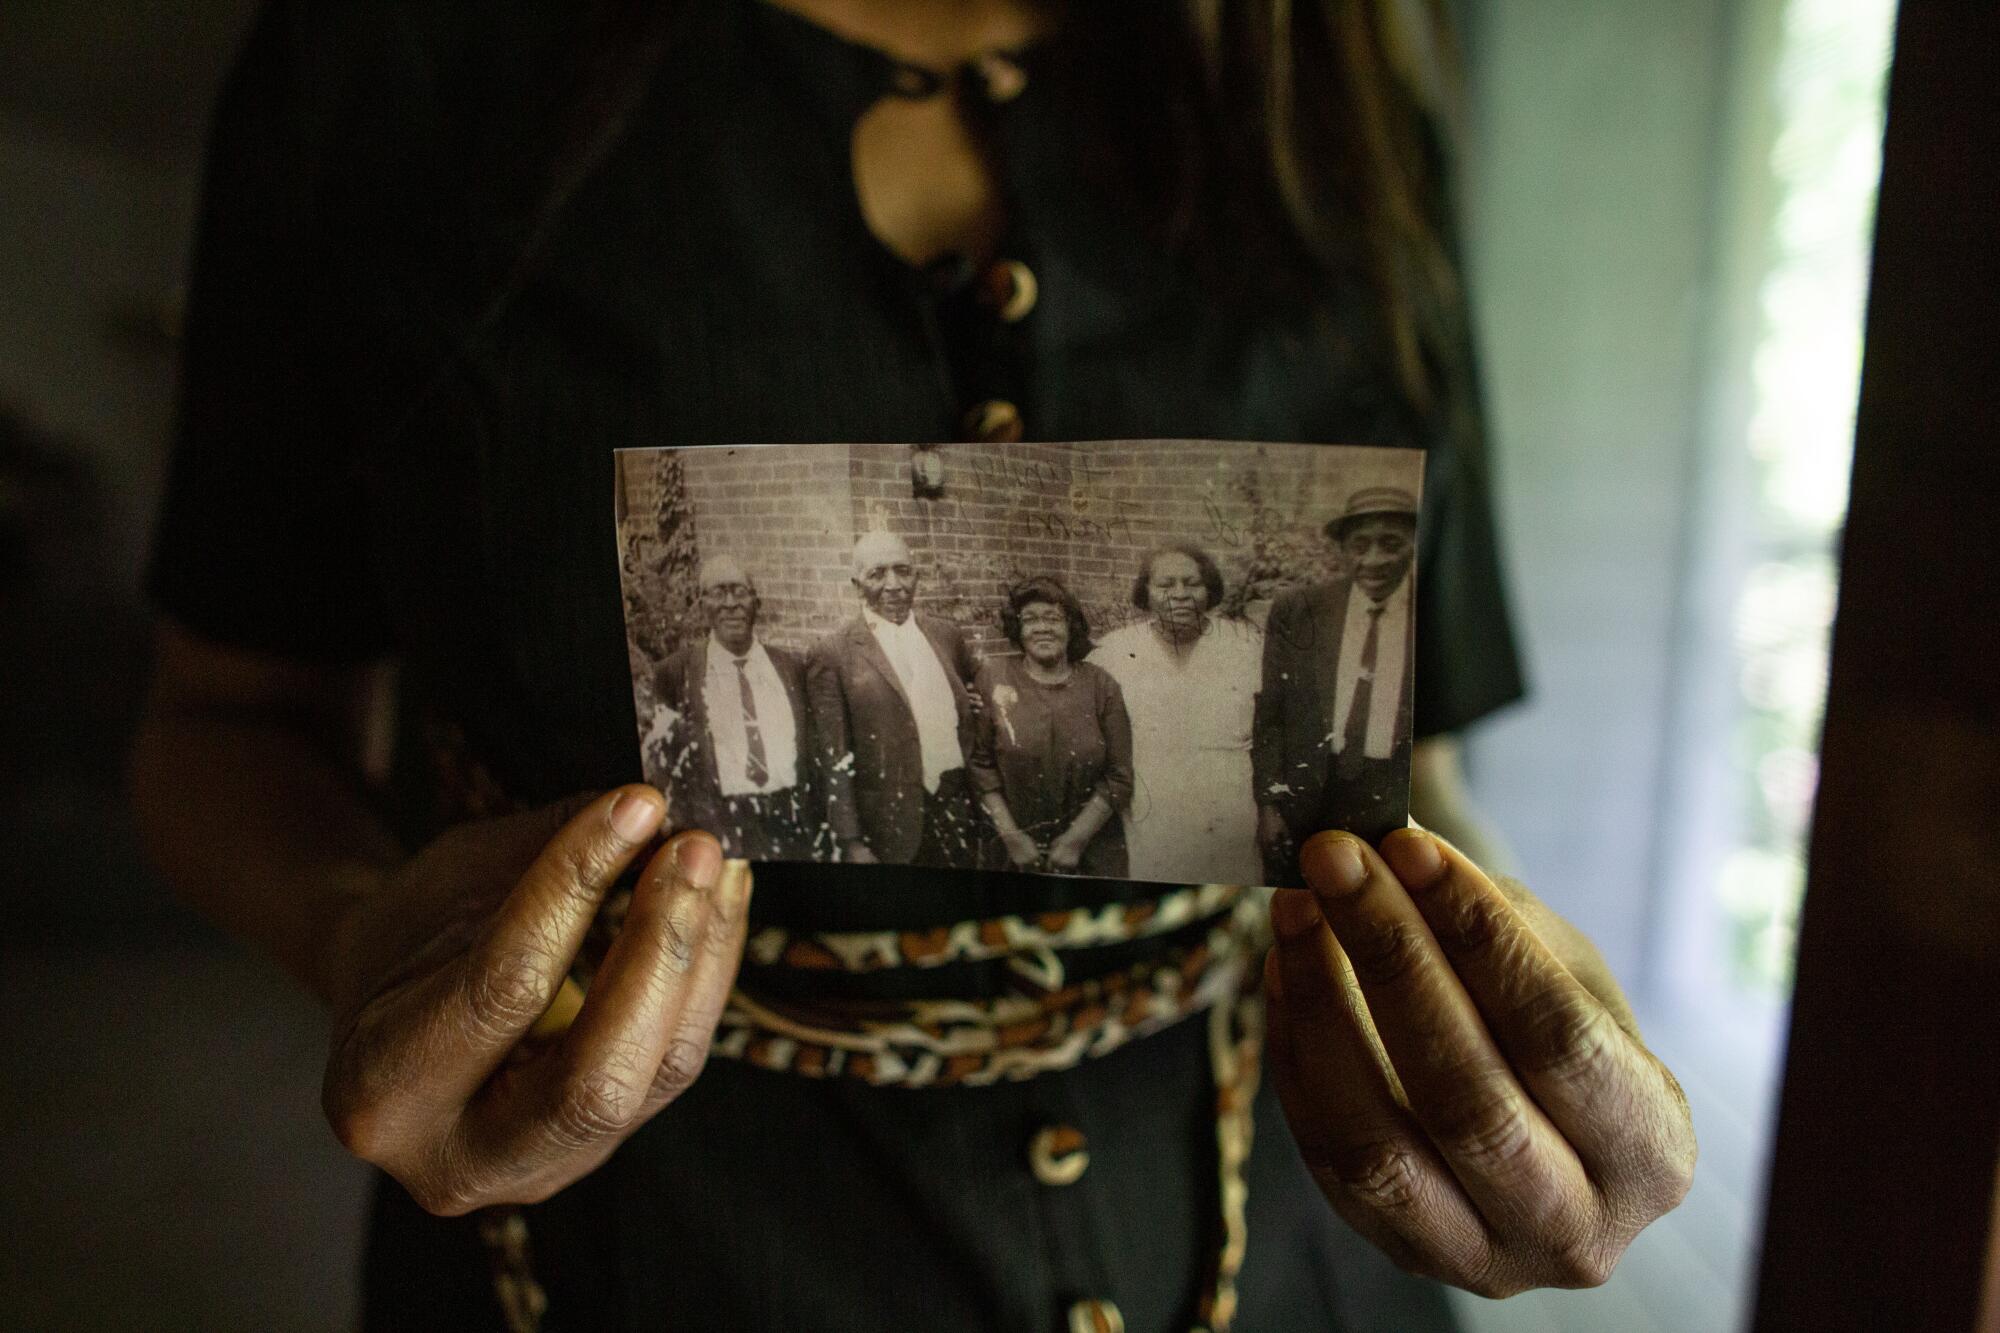 Angela Harrelson holds a photo of  George Floyd's great-grandparents and other relatives.